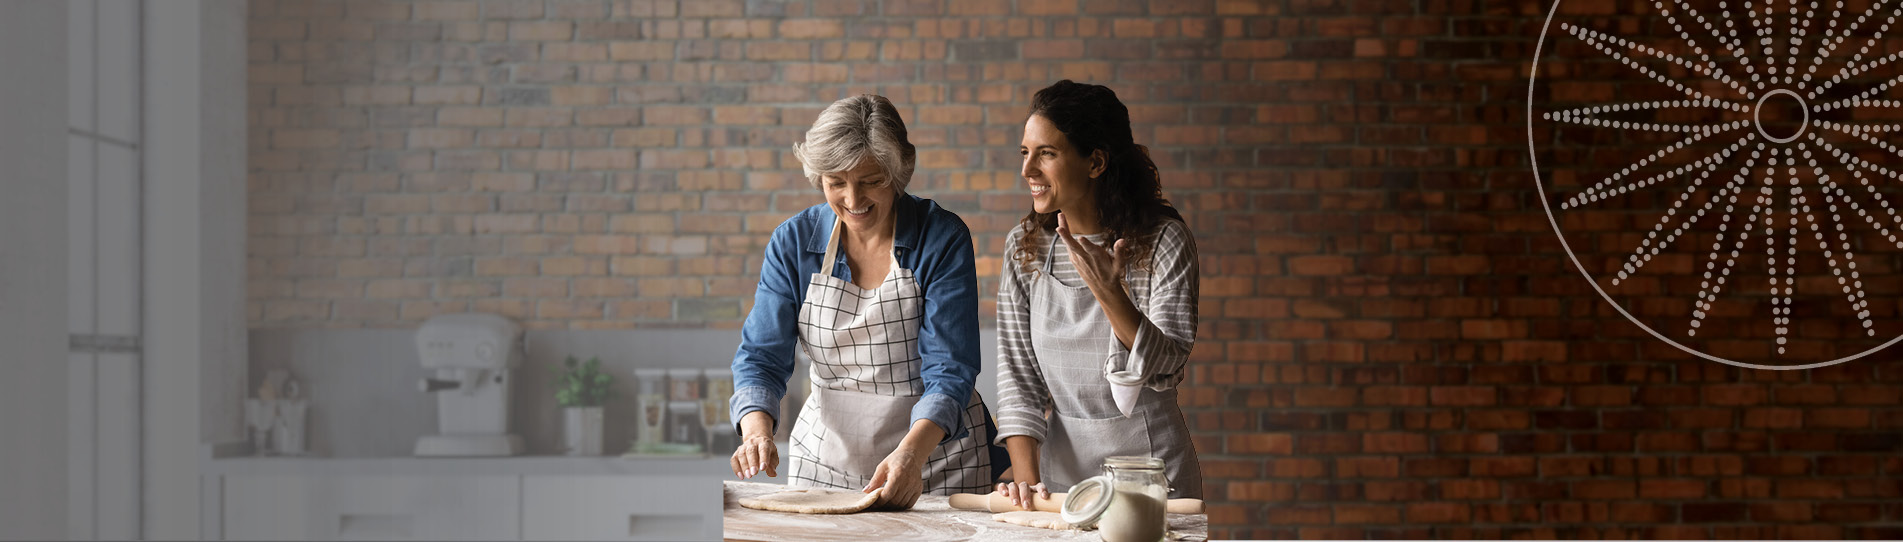 two women baking and smiling